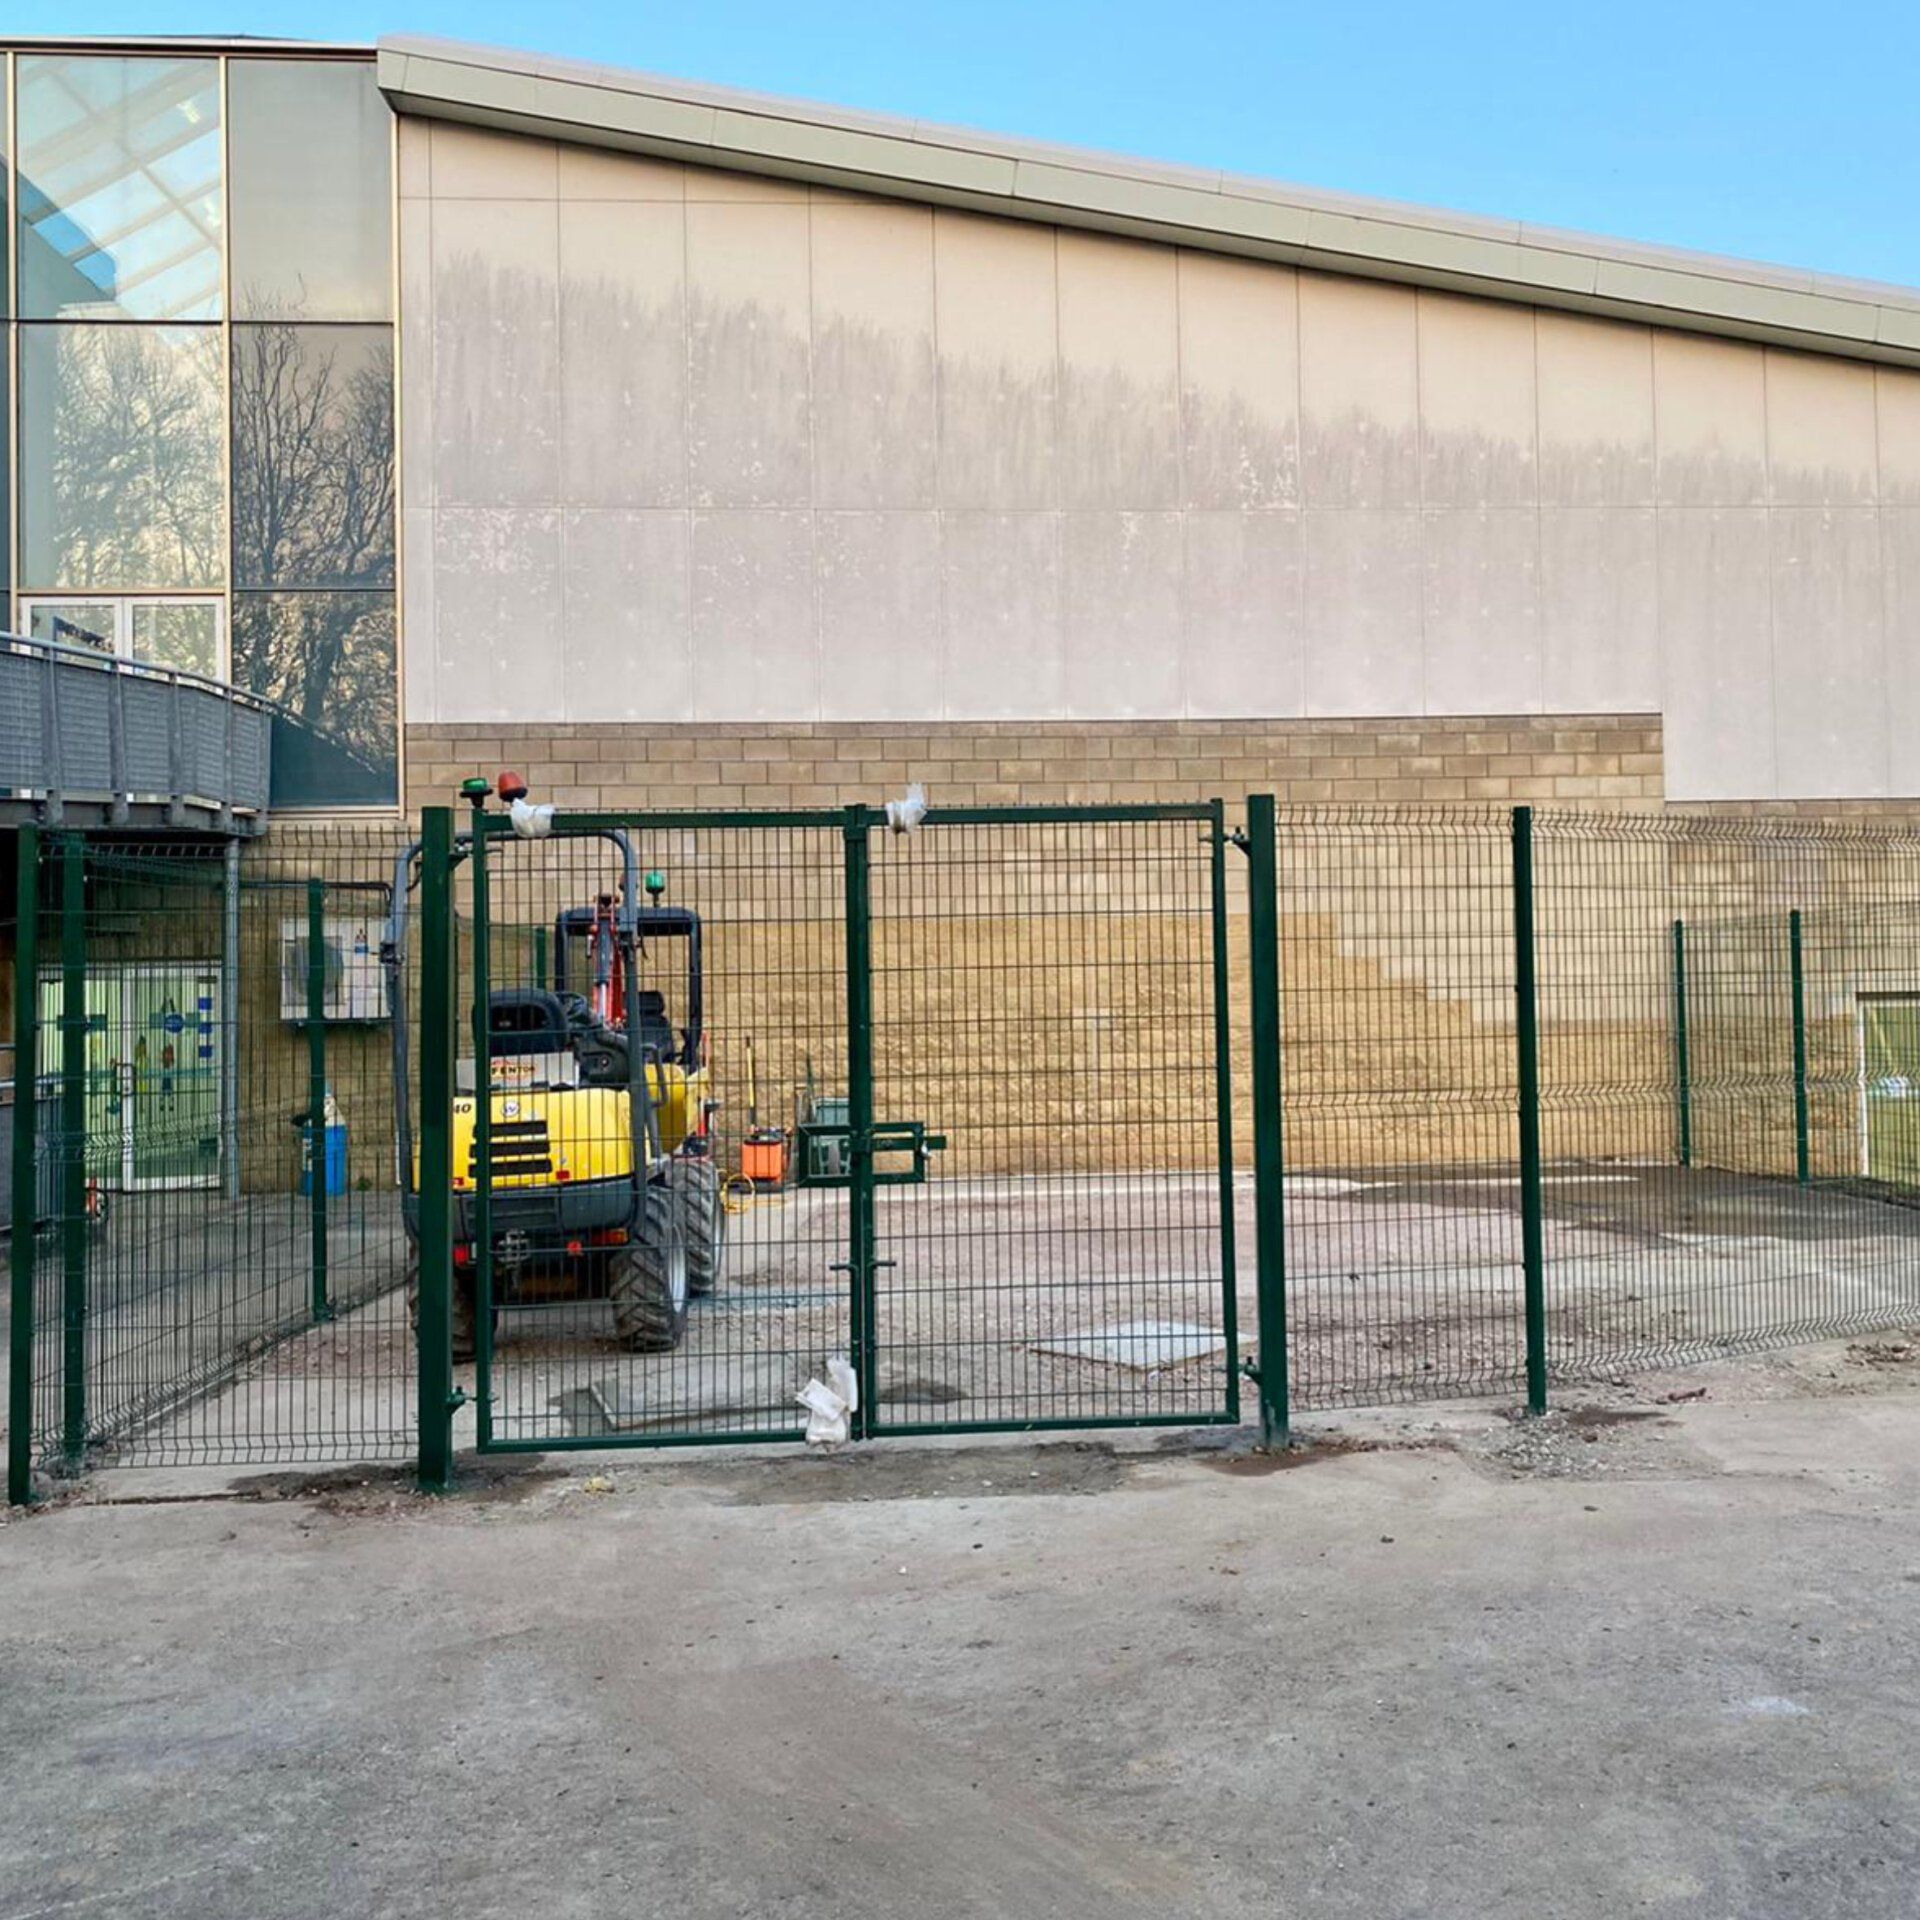 The New Fence, Gates and Equipment Foundations - Guildford Spectrum Outdoor Fitness Area